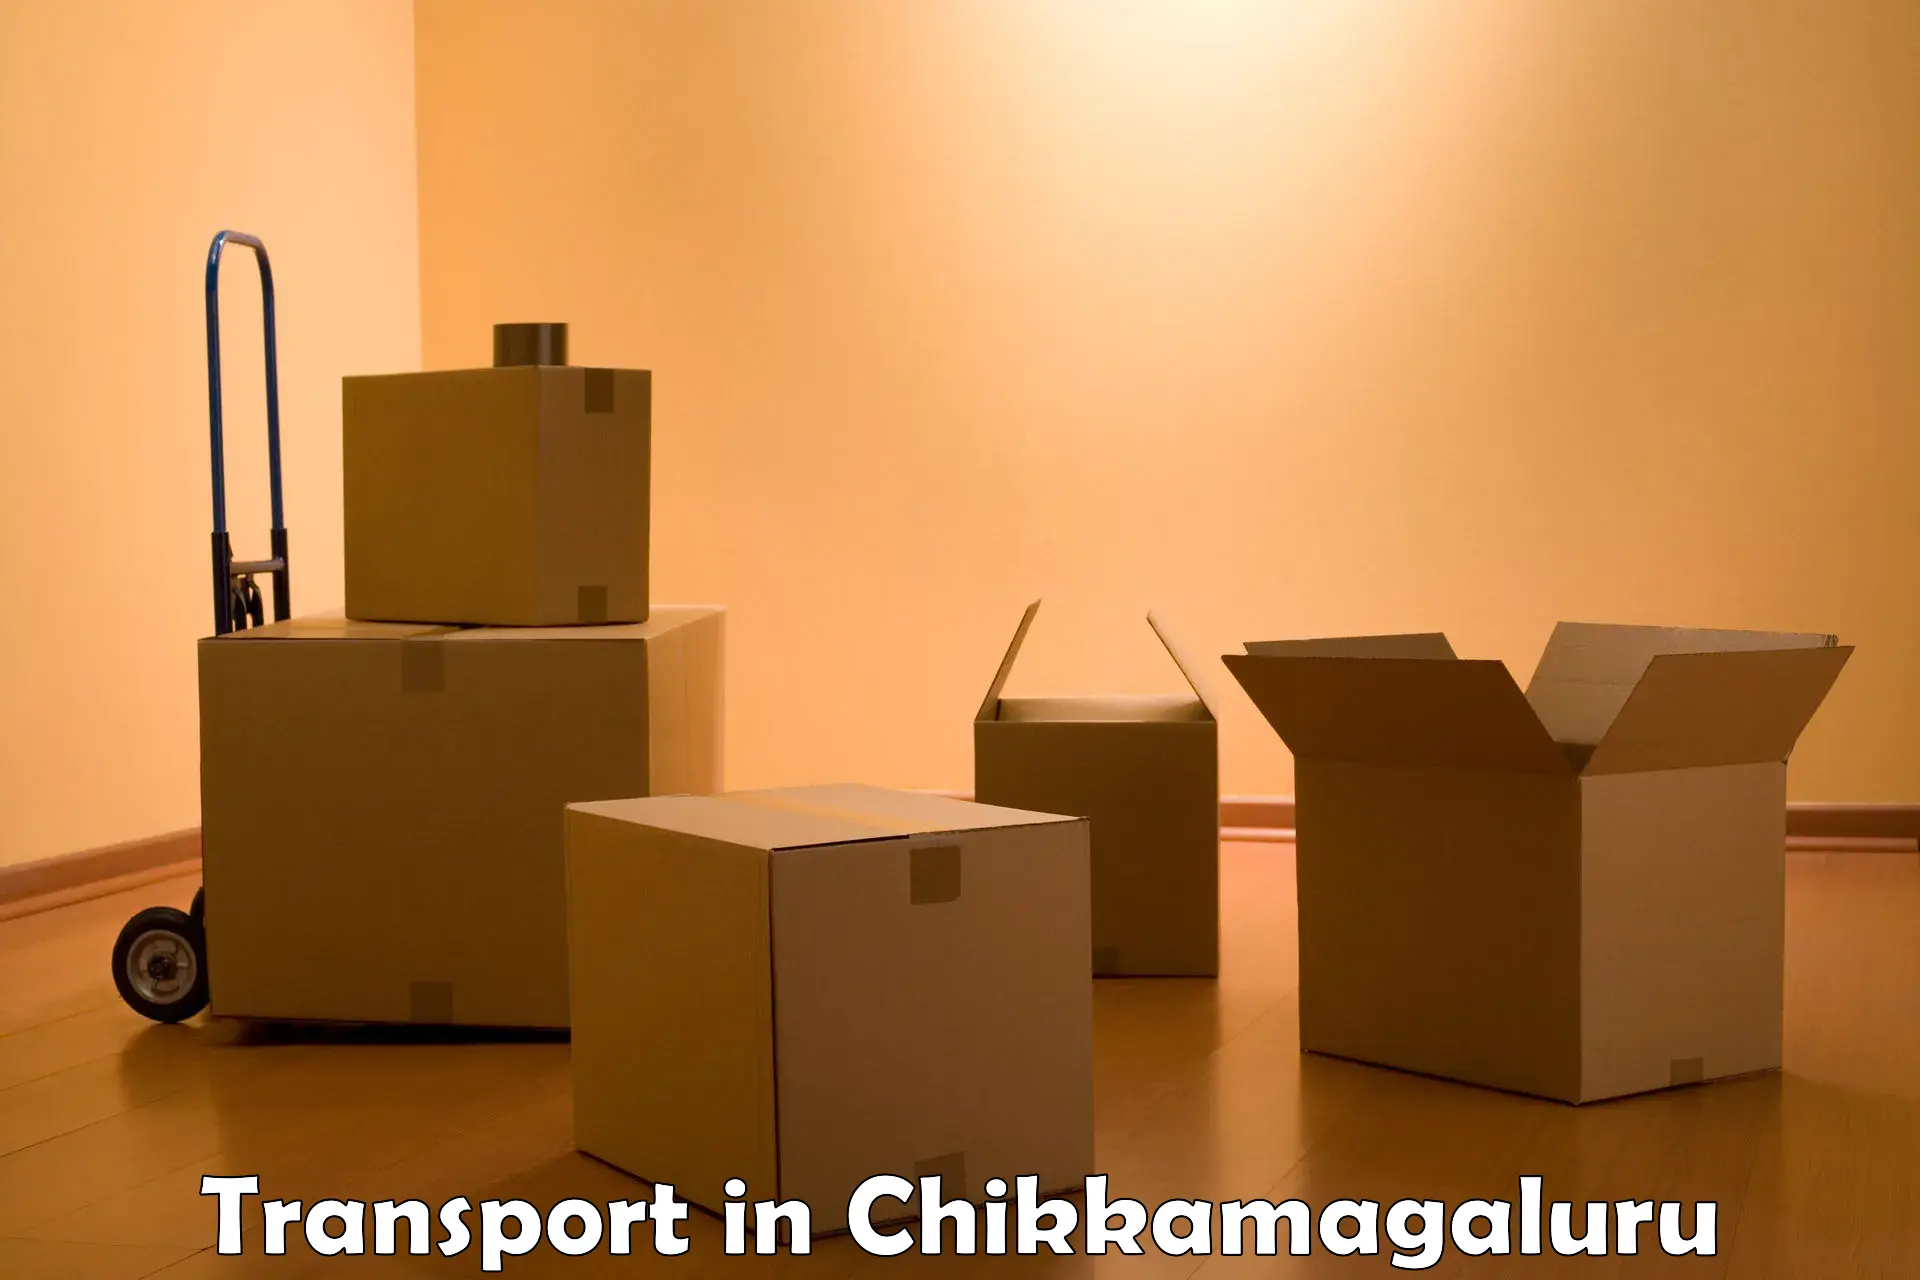 Daily parcel service transport in Chikkamagaluru